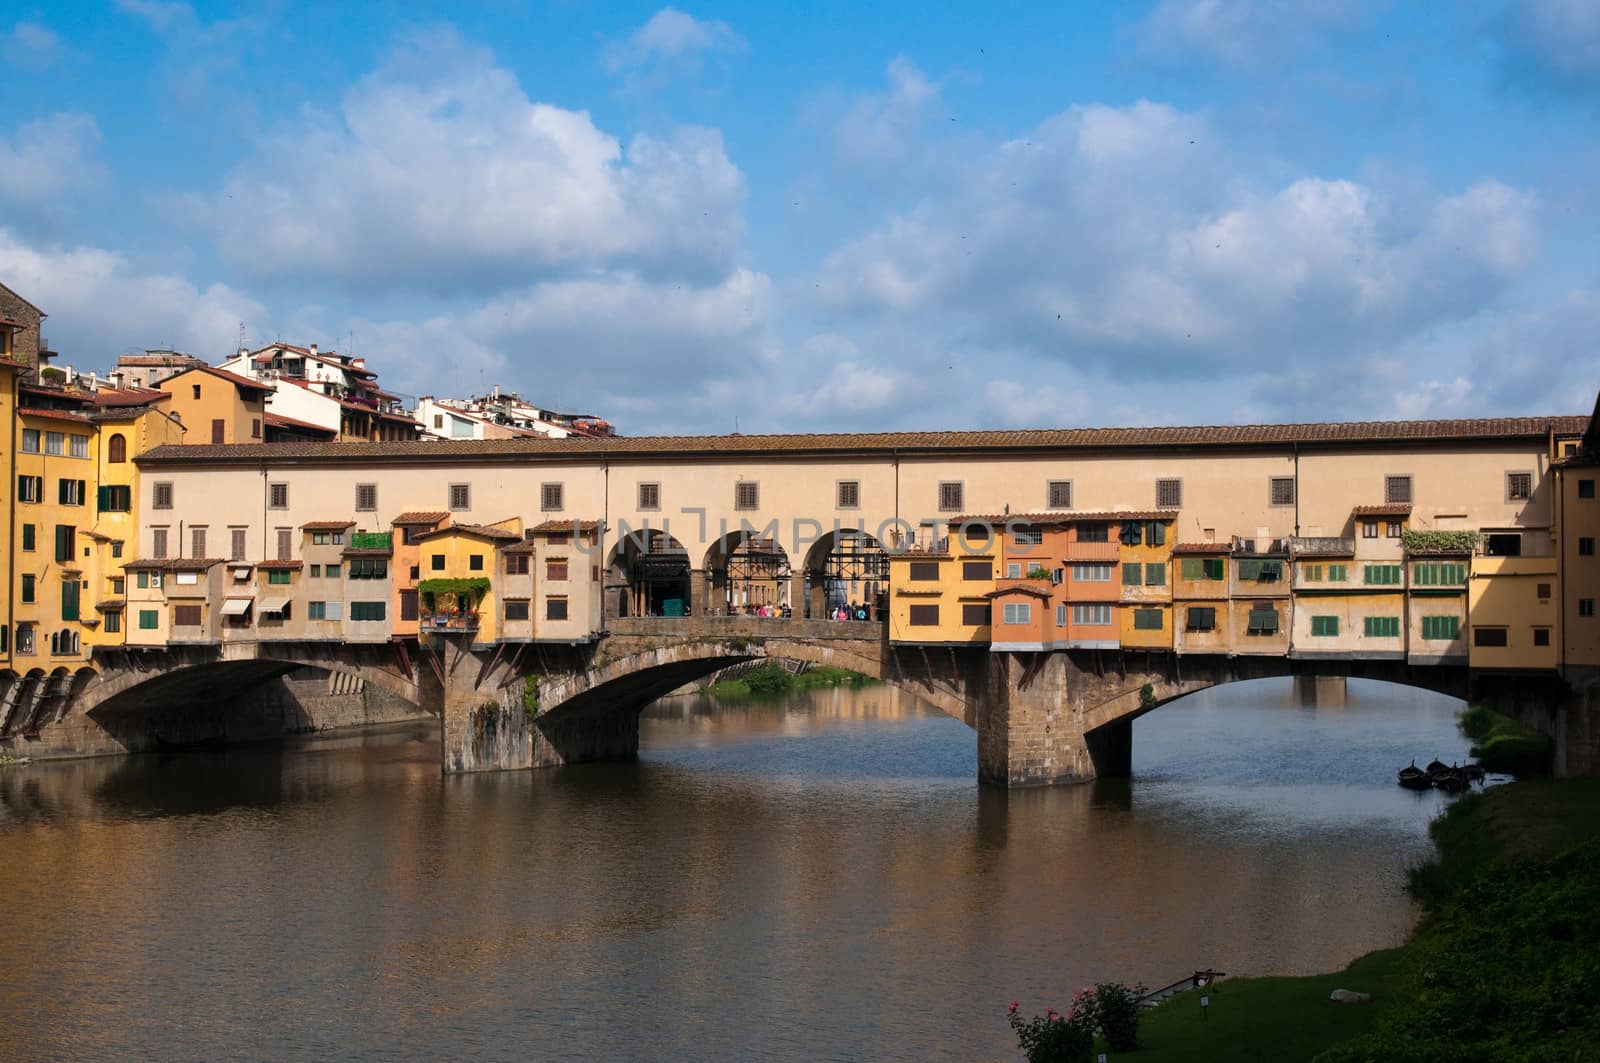 Crowds of tourists visit the Ponte Vecchio ("Old Bridge") which is a Medieval bridge over the Arno River in Florence, Tuscany, Italy.